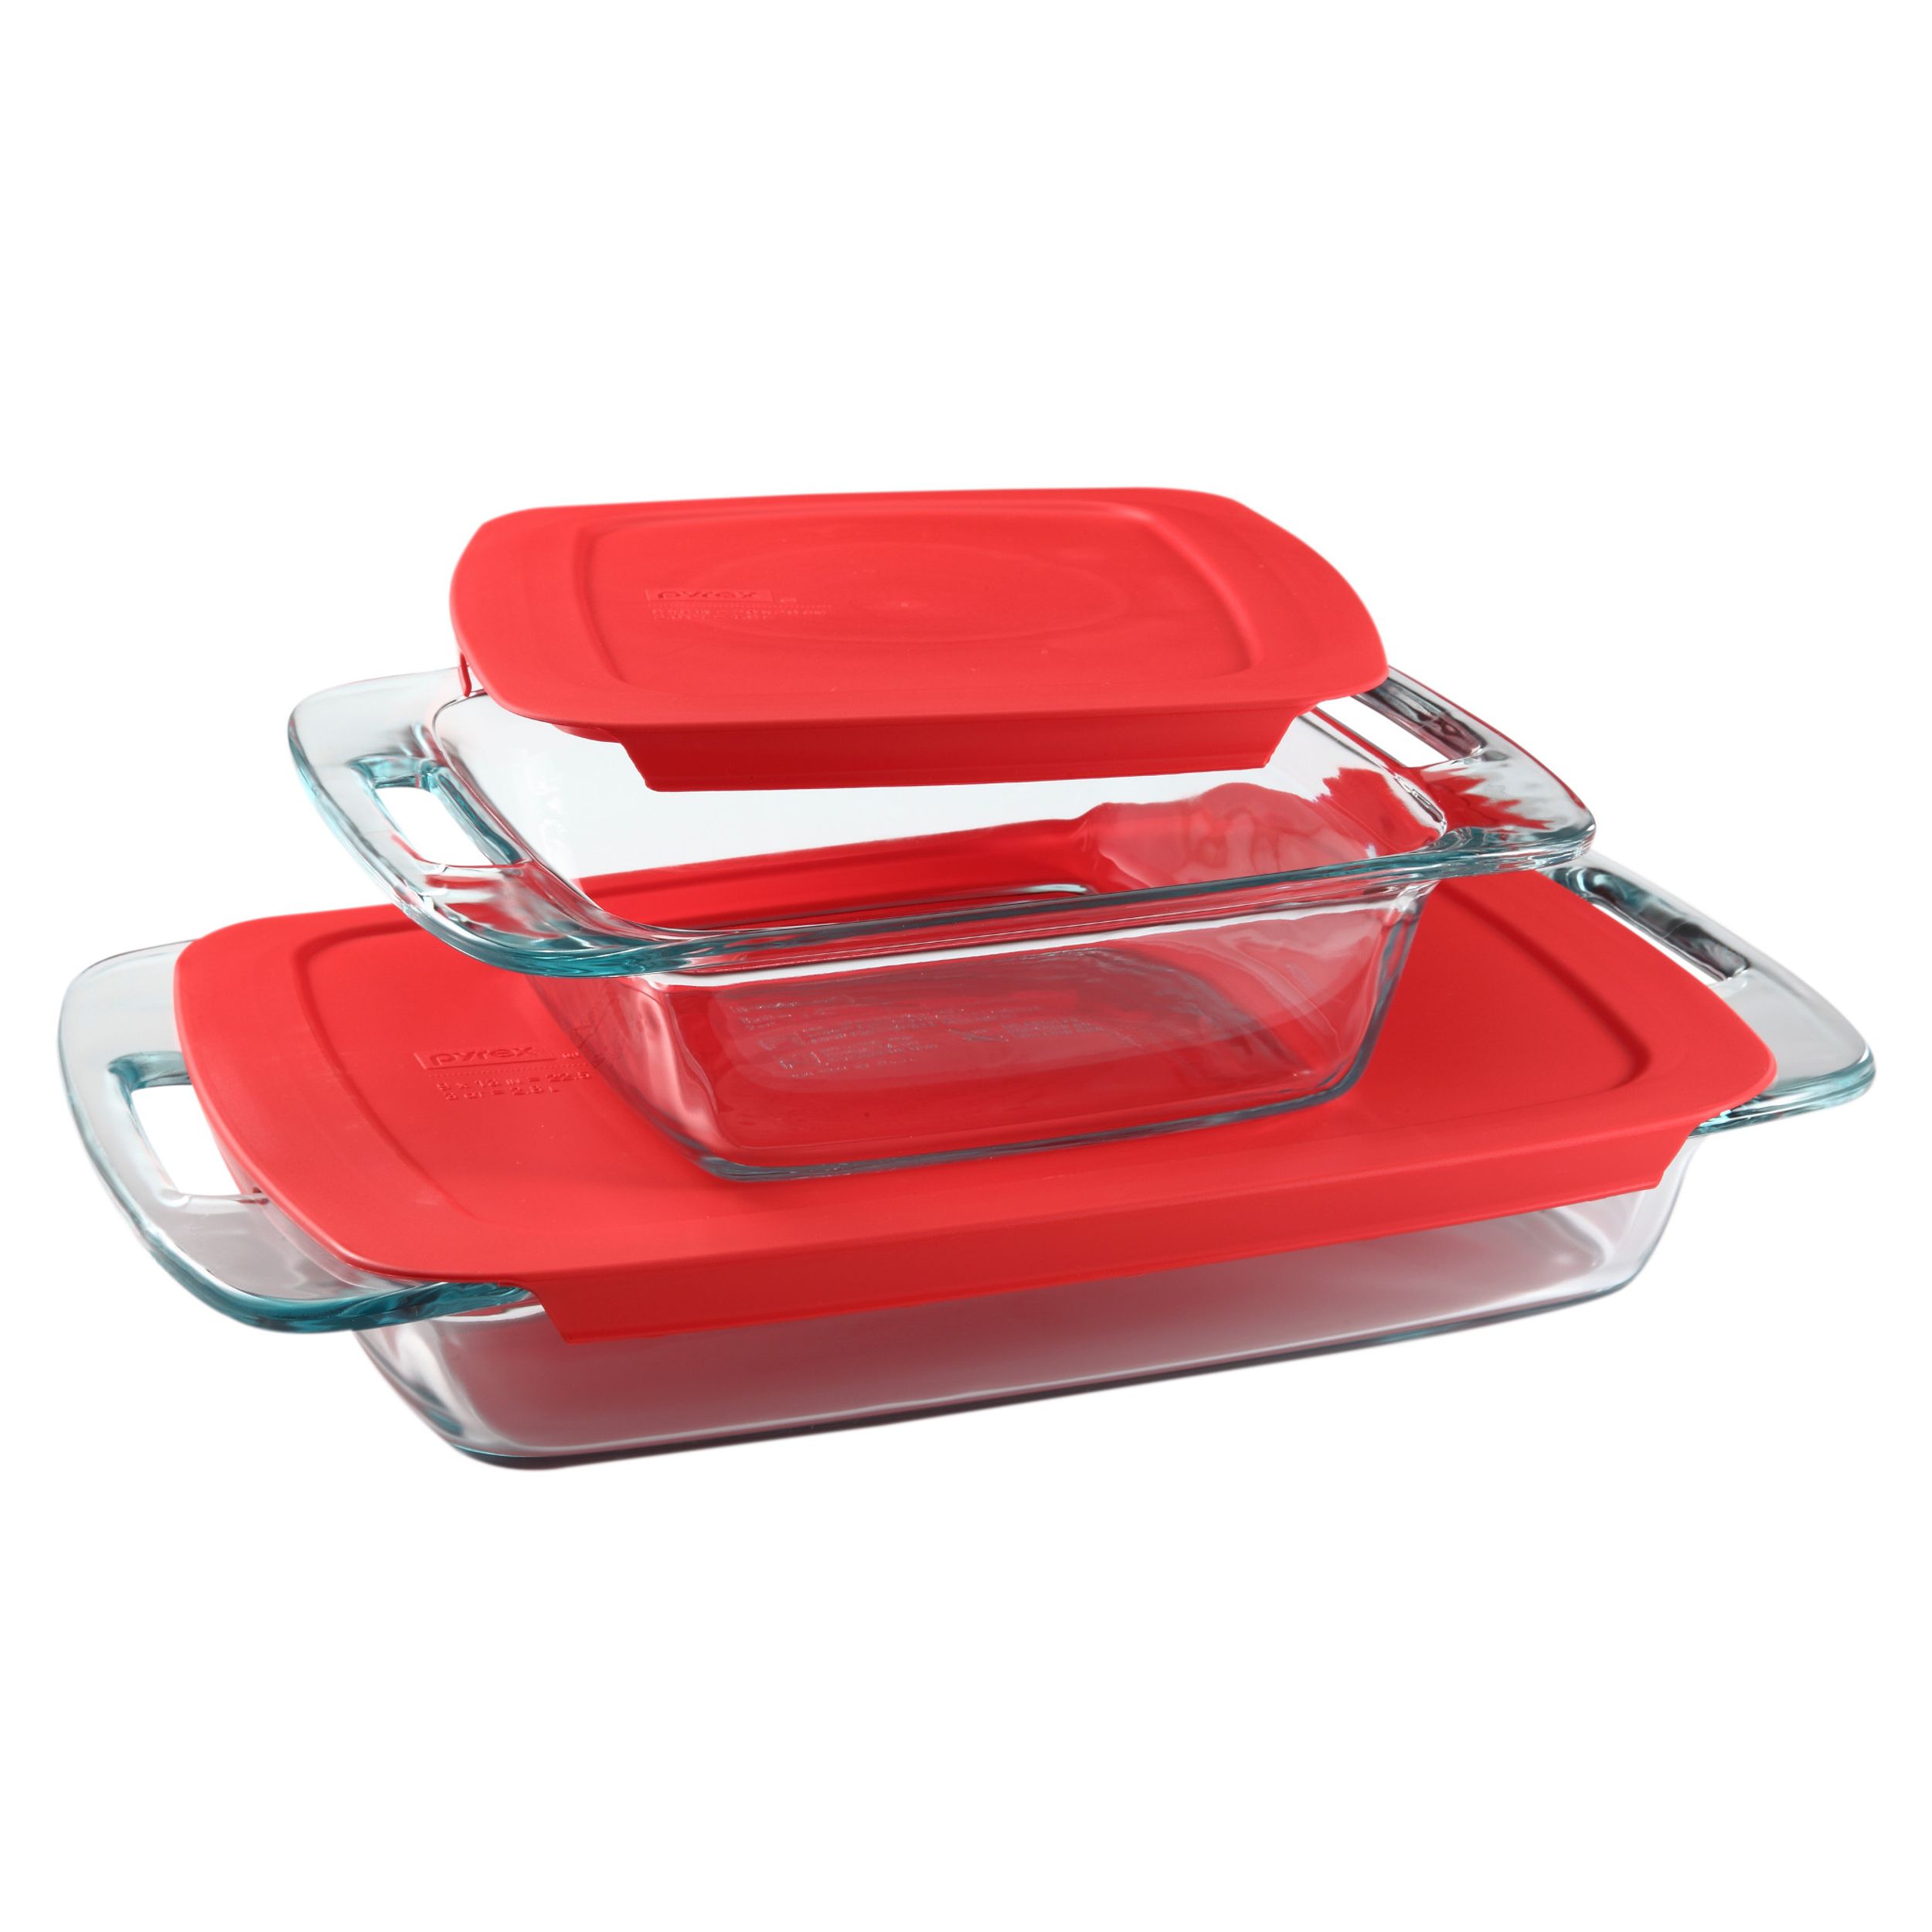 Pyrex Easy Grab 4-piece Glass Bakeware Set with Red Lids - image 1 of 6